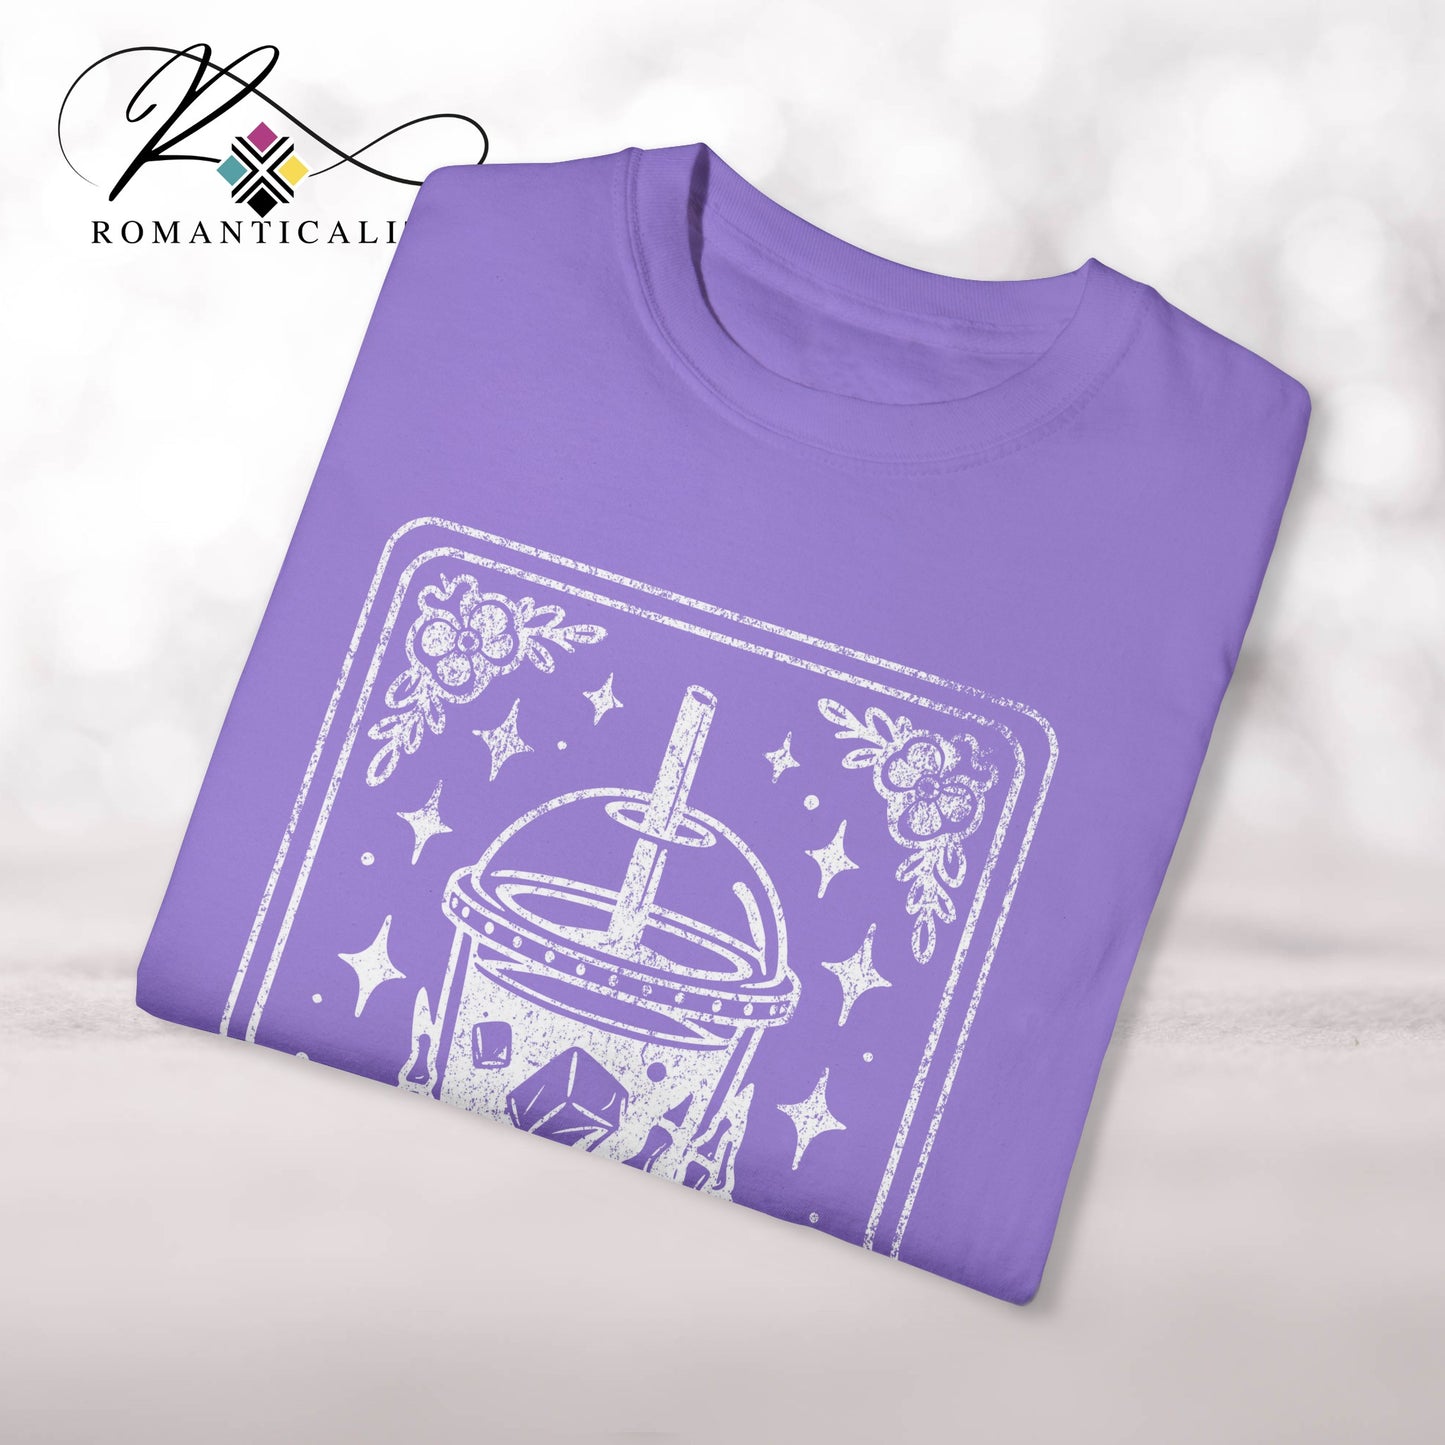 The ICED COFFEE Tarot Graphic T-Shirt-Humorous Tee-Comfort Colors Graphic Tee-Unisex Graphic Tee-Tarot Card Graphic T-shirt-Giftful-Gift-Mother's Day